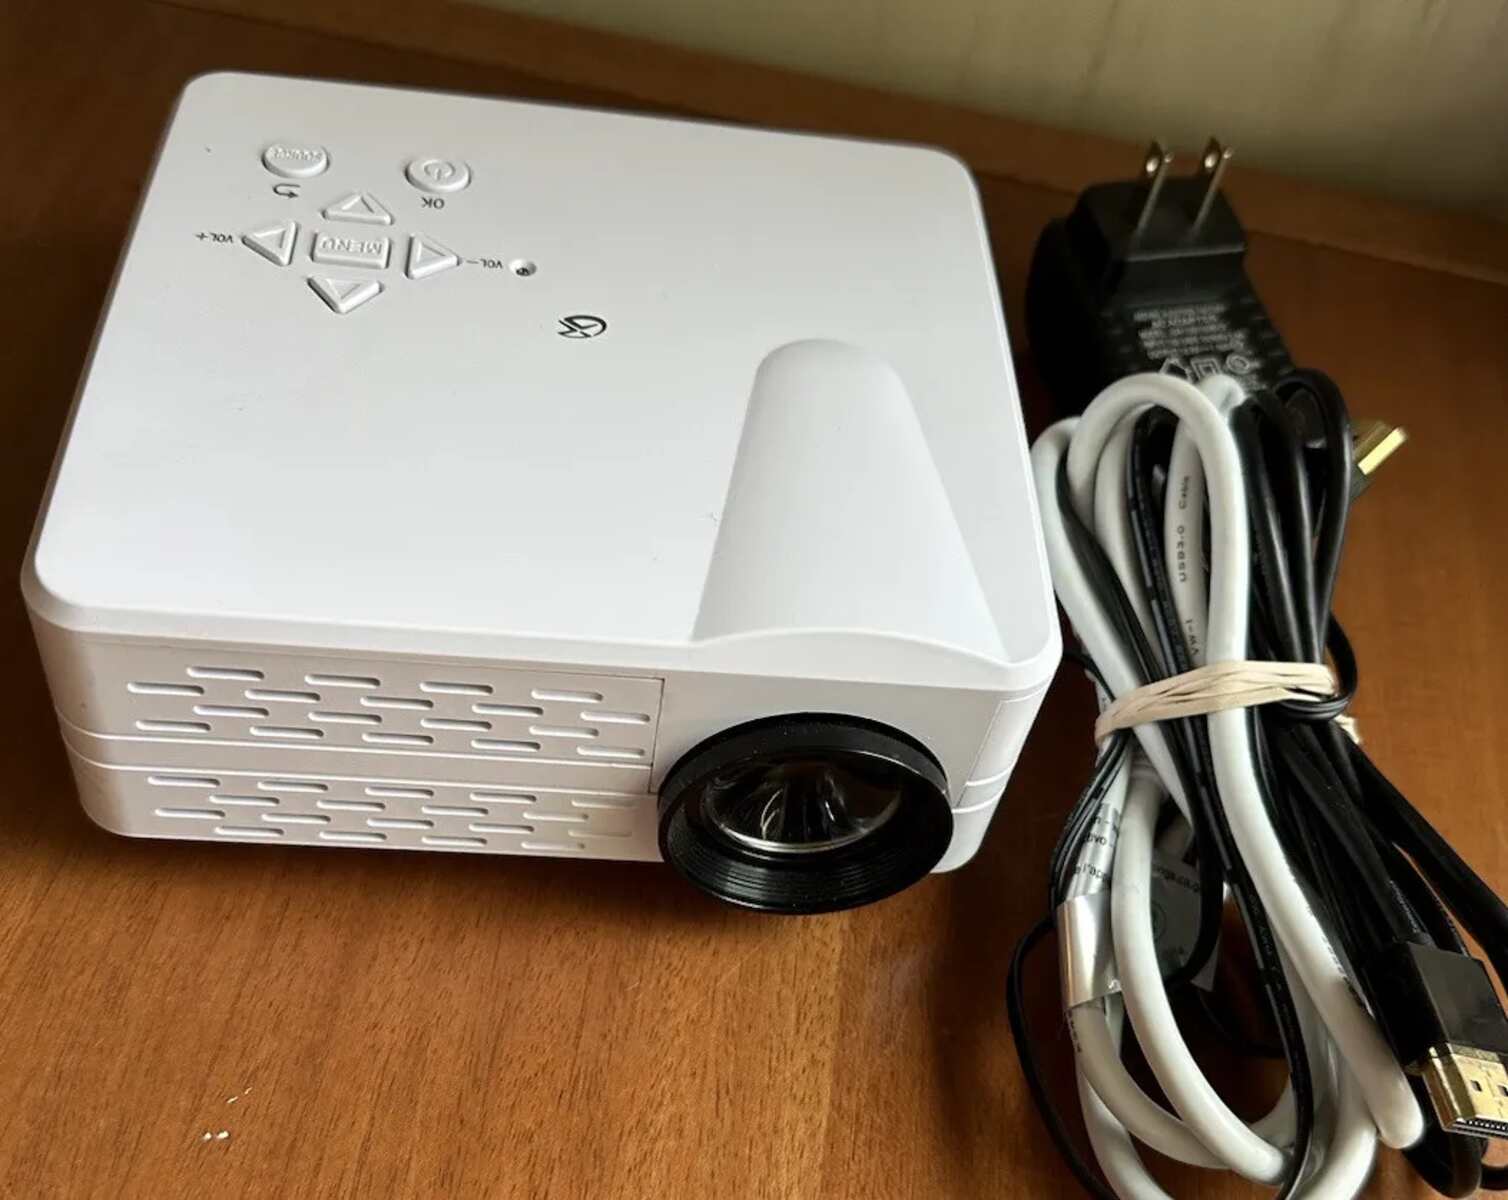 How To Connect GPX Mini Projector With Bluetooth To Phone